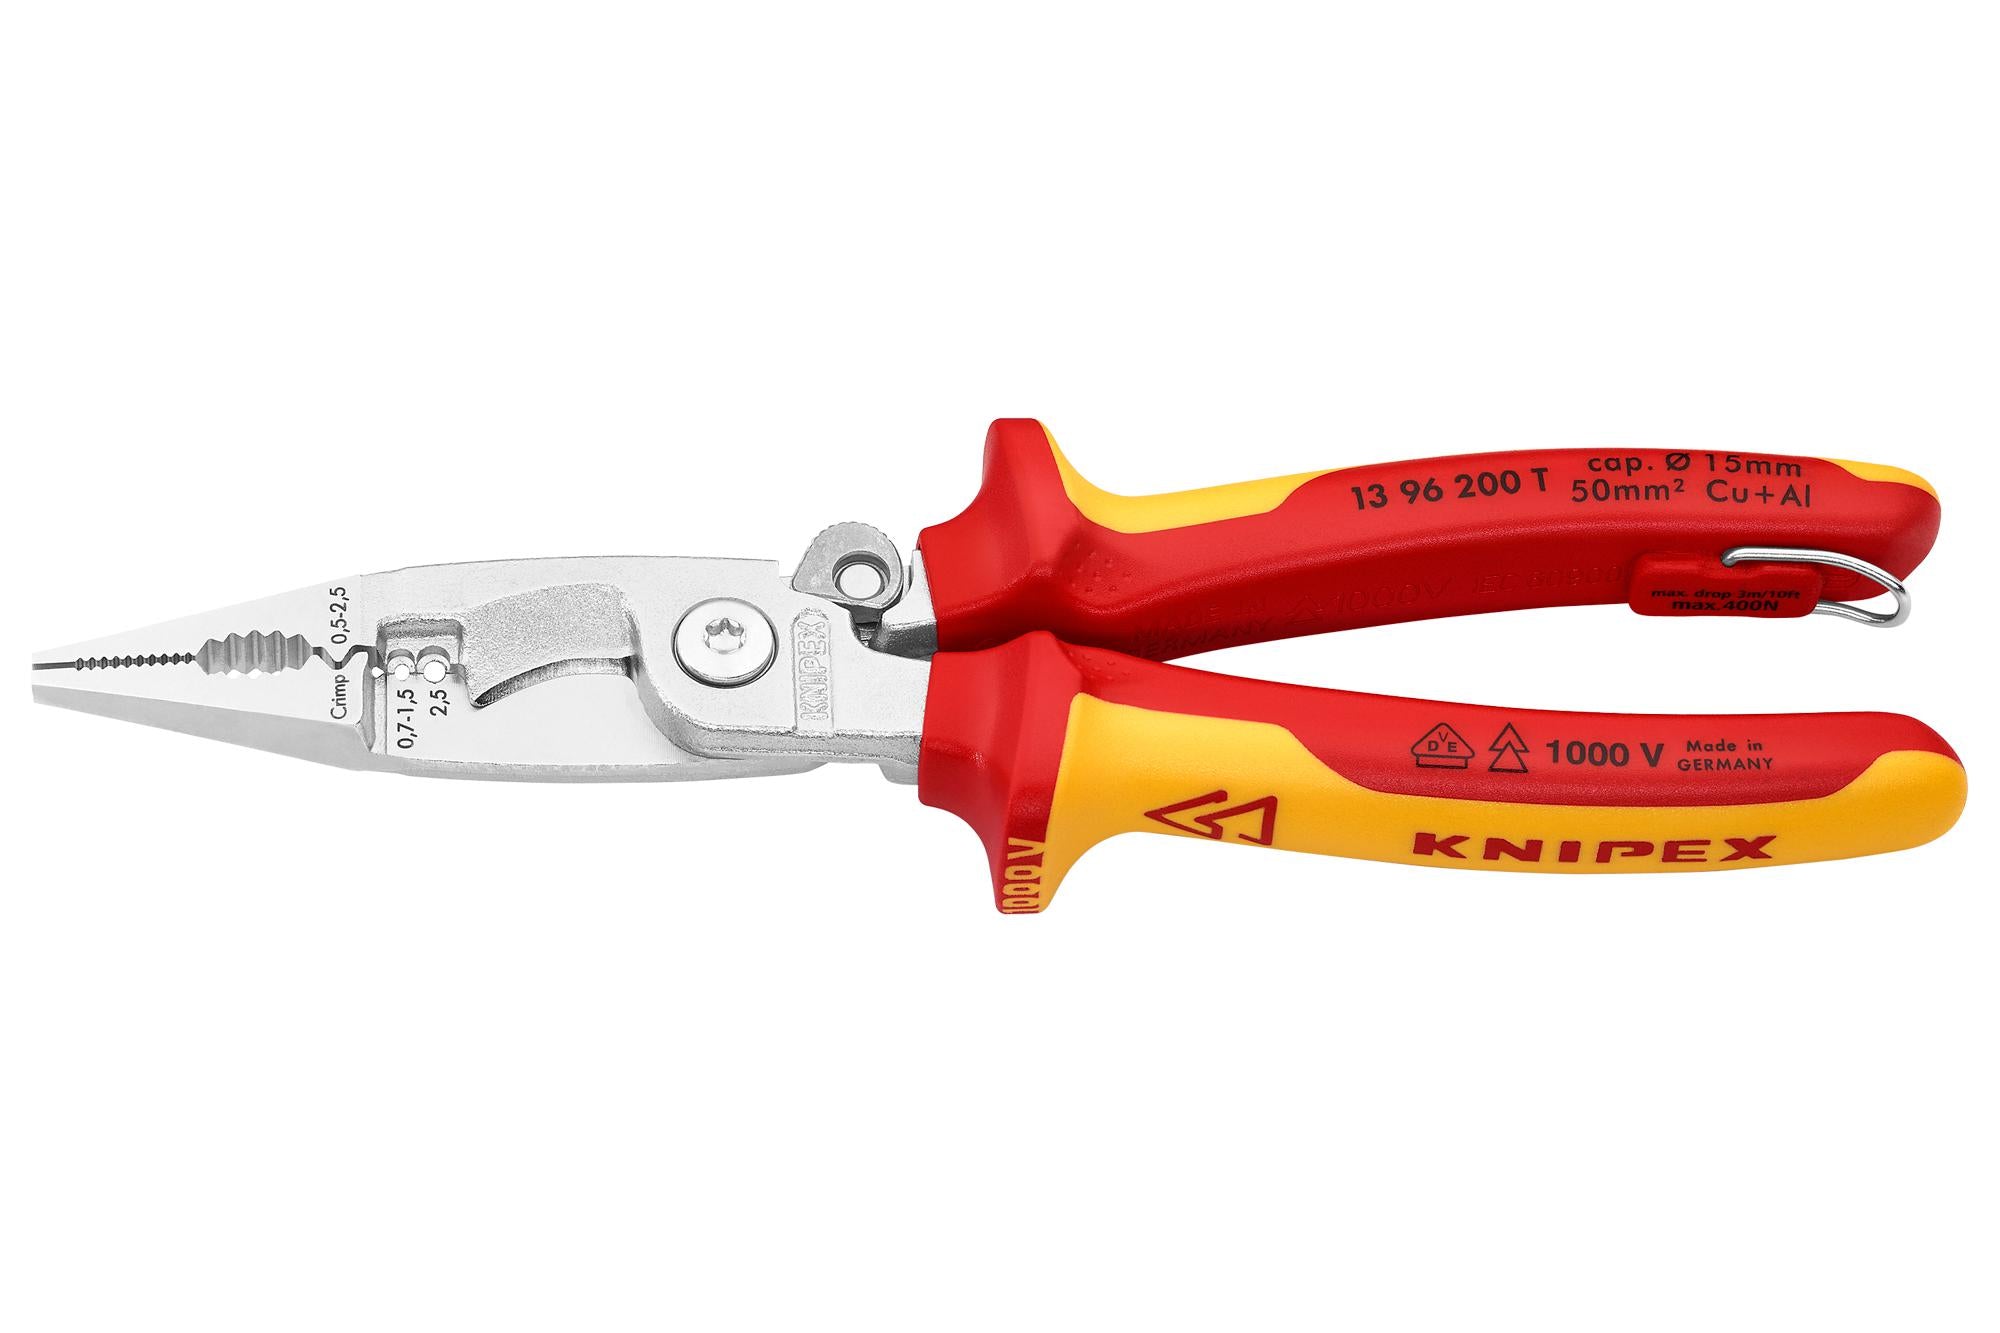 13 96 200 T ELECTRICIAN PLIER, 200MM, 1/0AWG KNIPEX